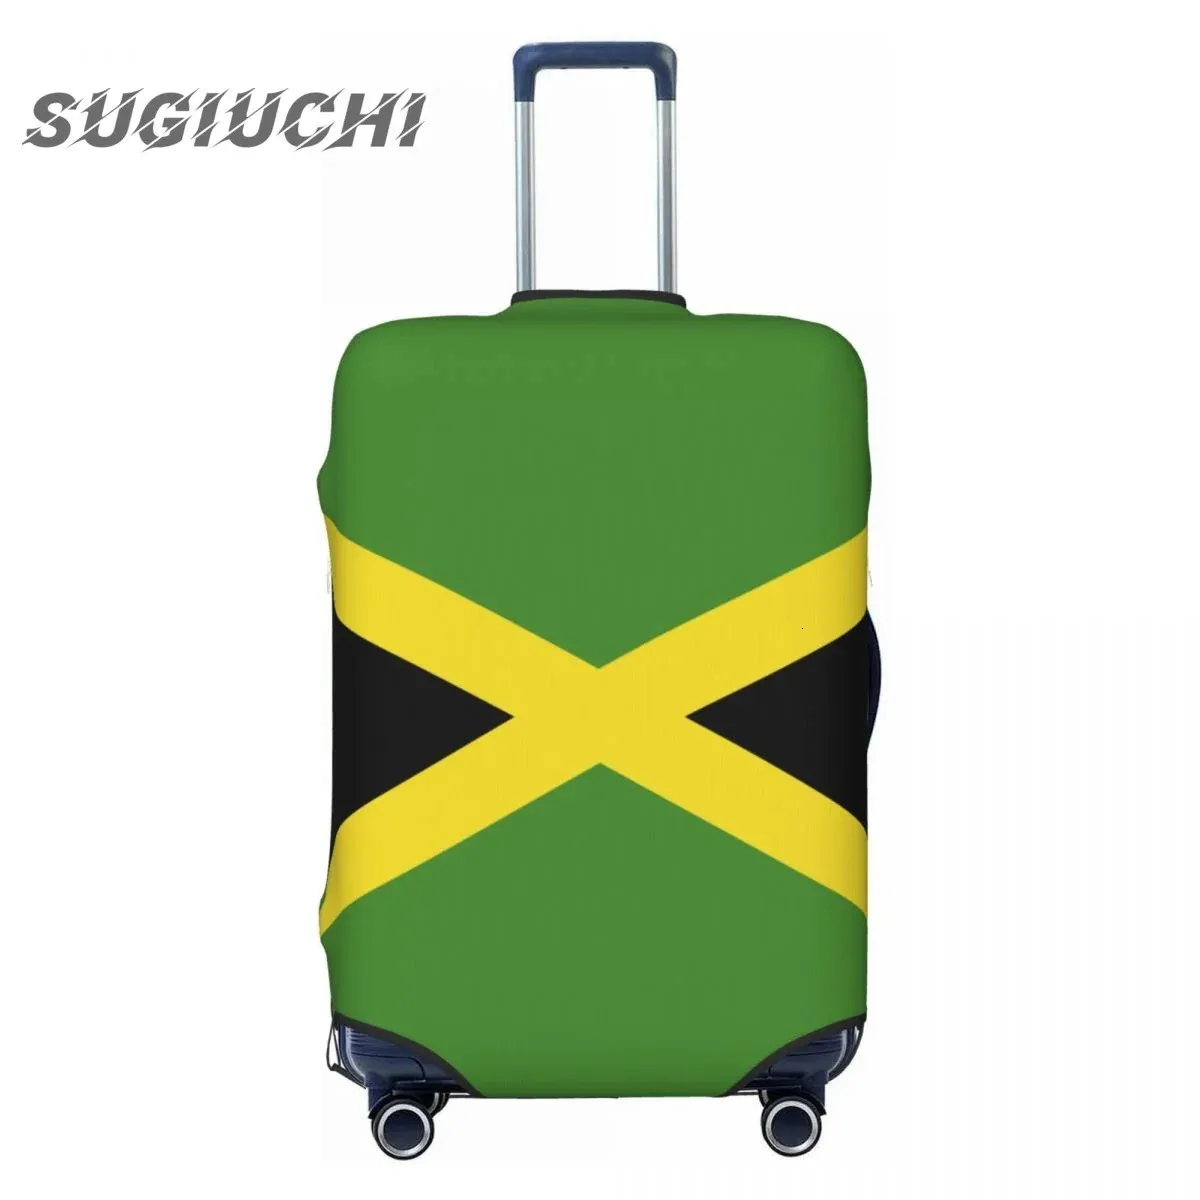 Jamaica Country Flag Luggage Cover Suitcase Travel Accessories Printed Elastic Dust Bag Trolley Case Protective 240105